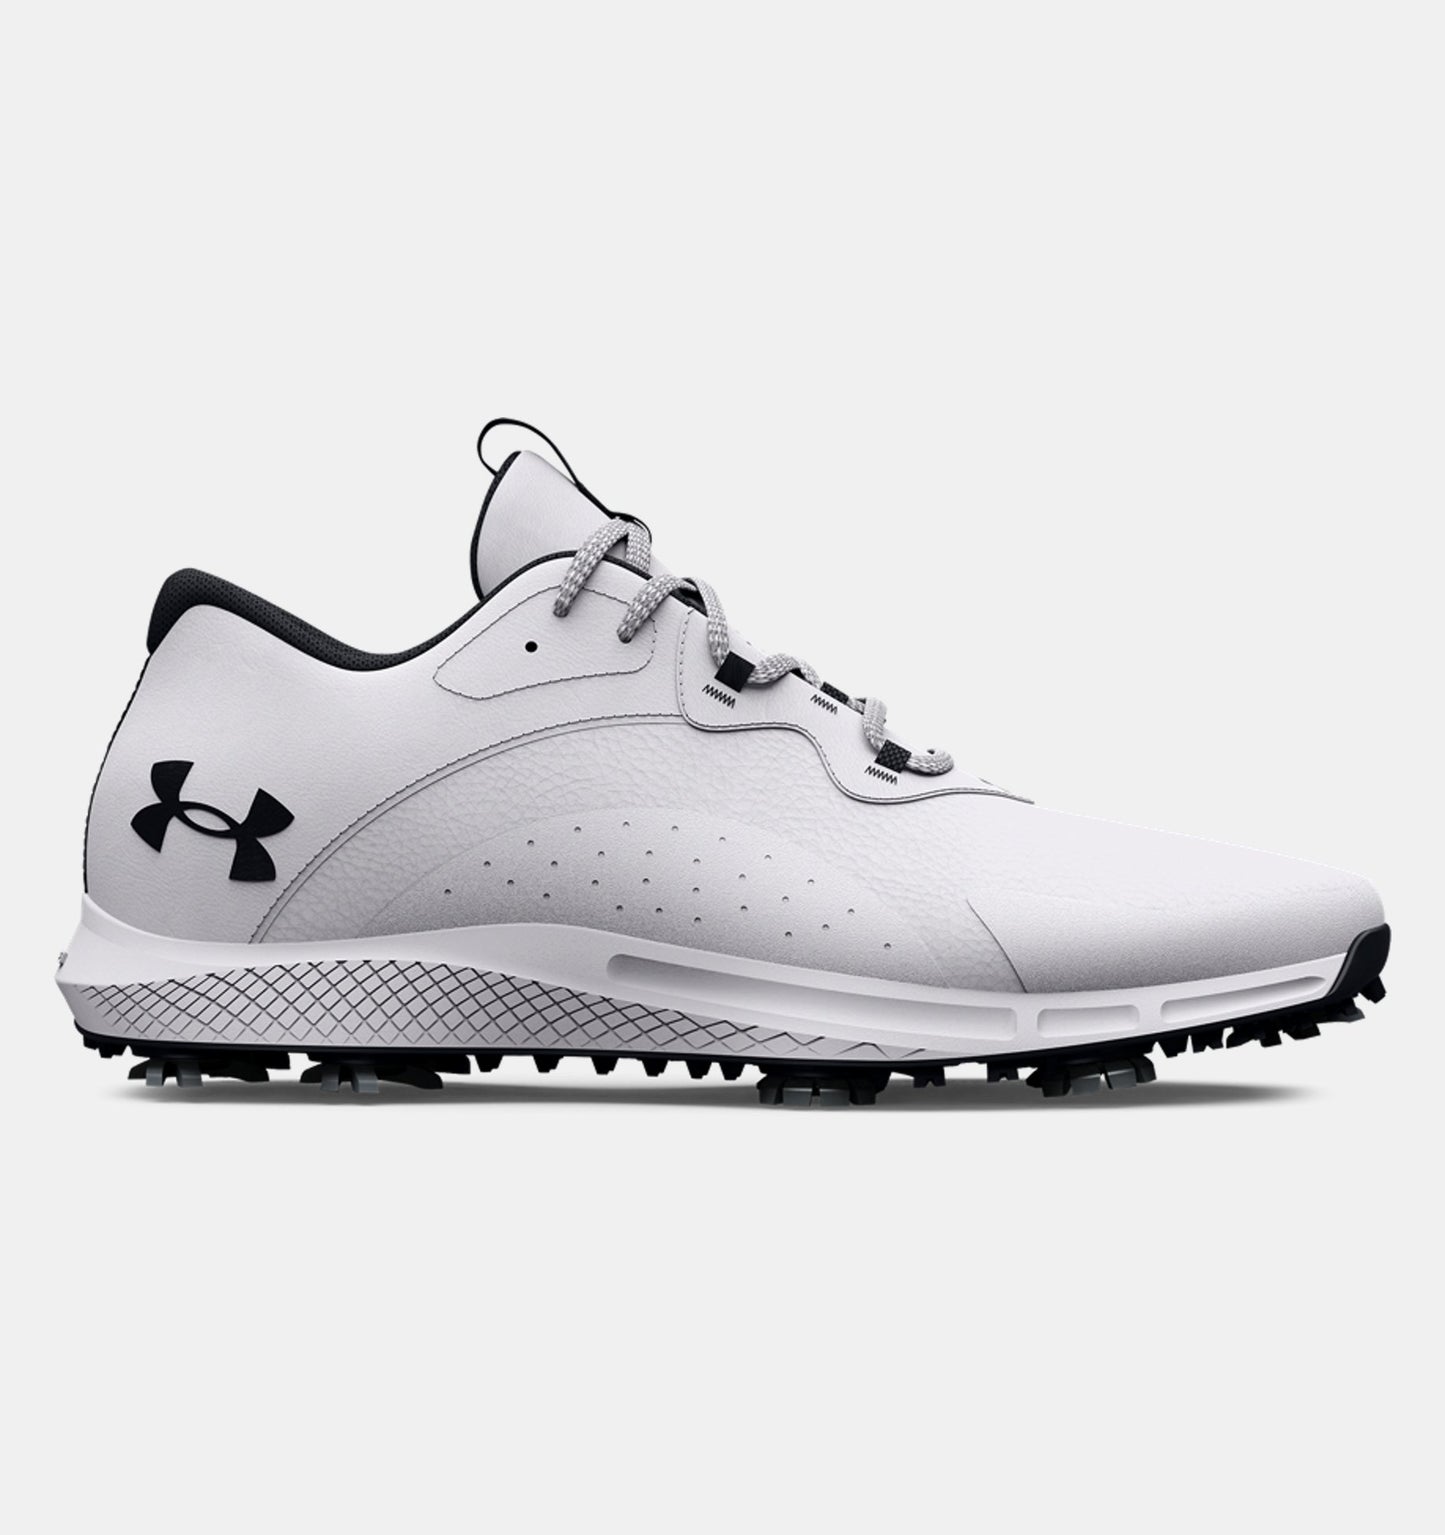 Under Armour Charged Draw 2 Wide Black Golf Shoes White/Black